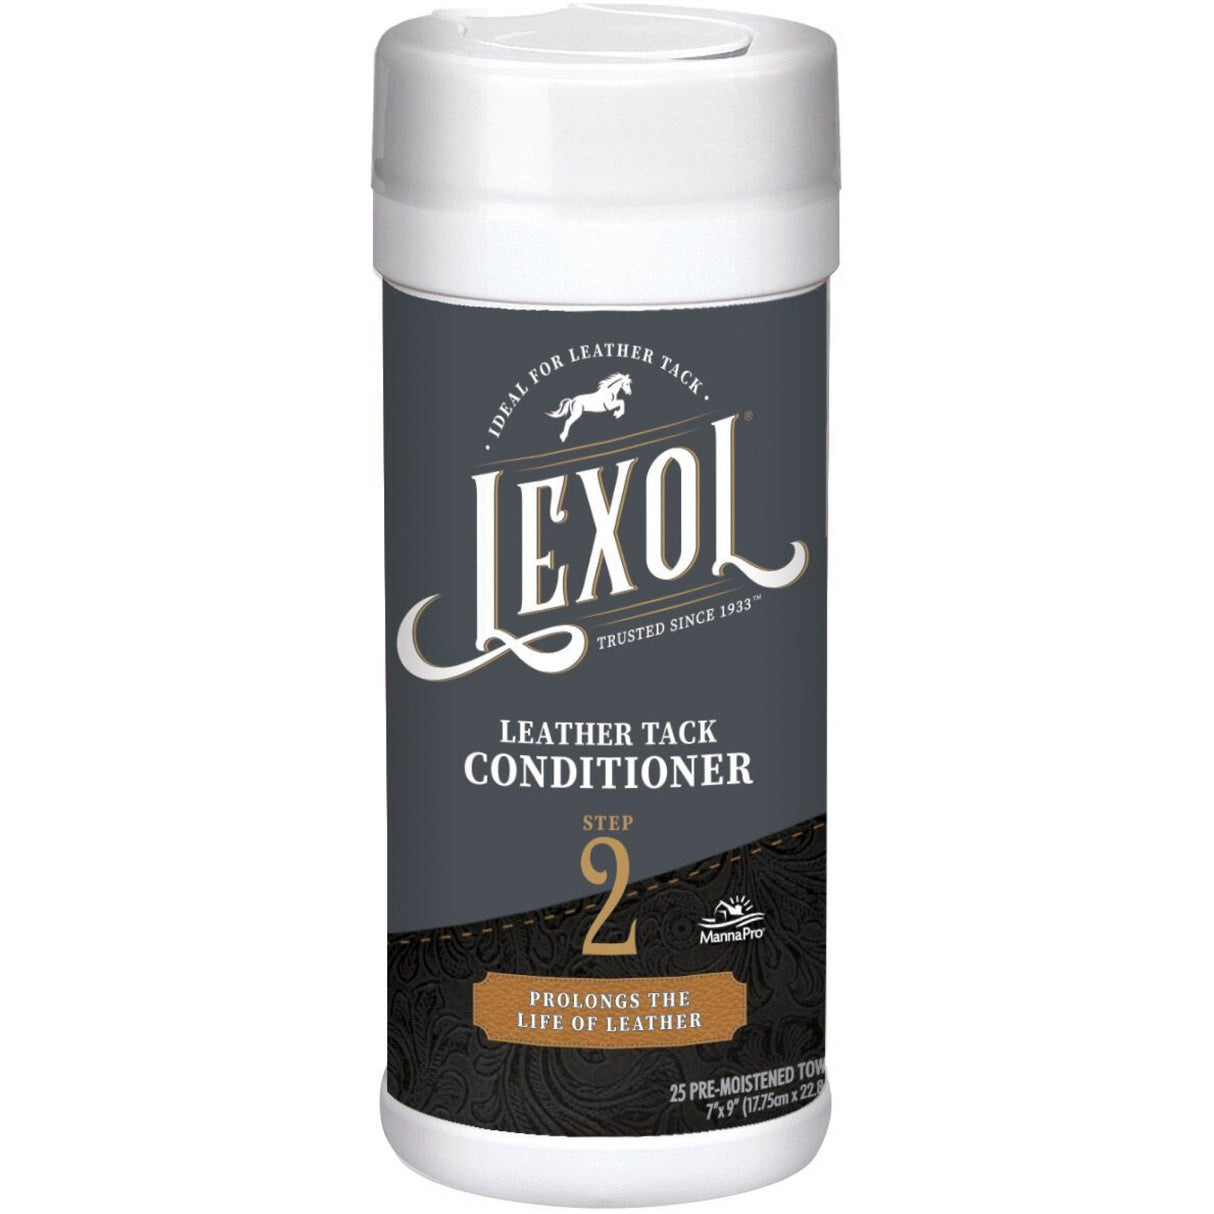 Lexol Leather Tack Conditioner Step 2 - 7"X9"Towels 821-019